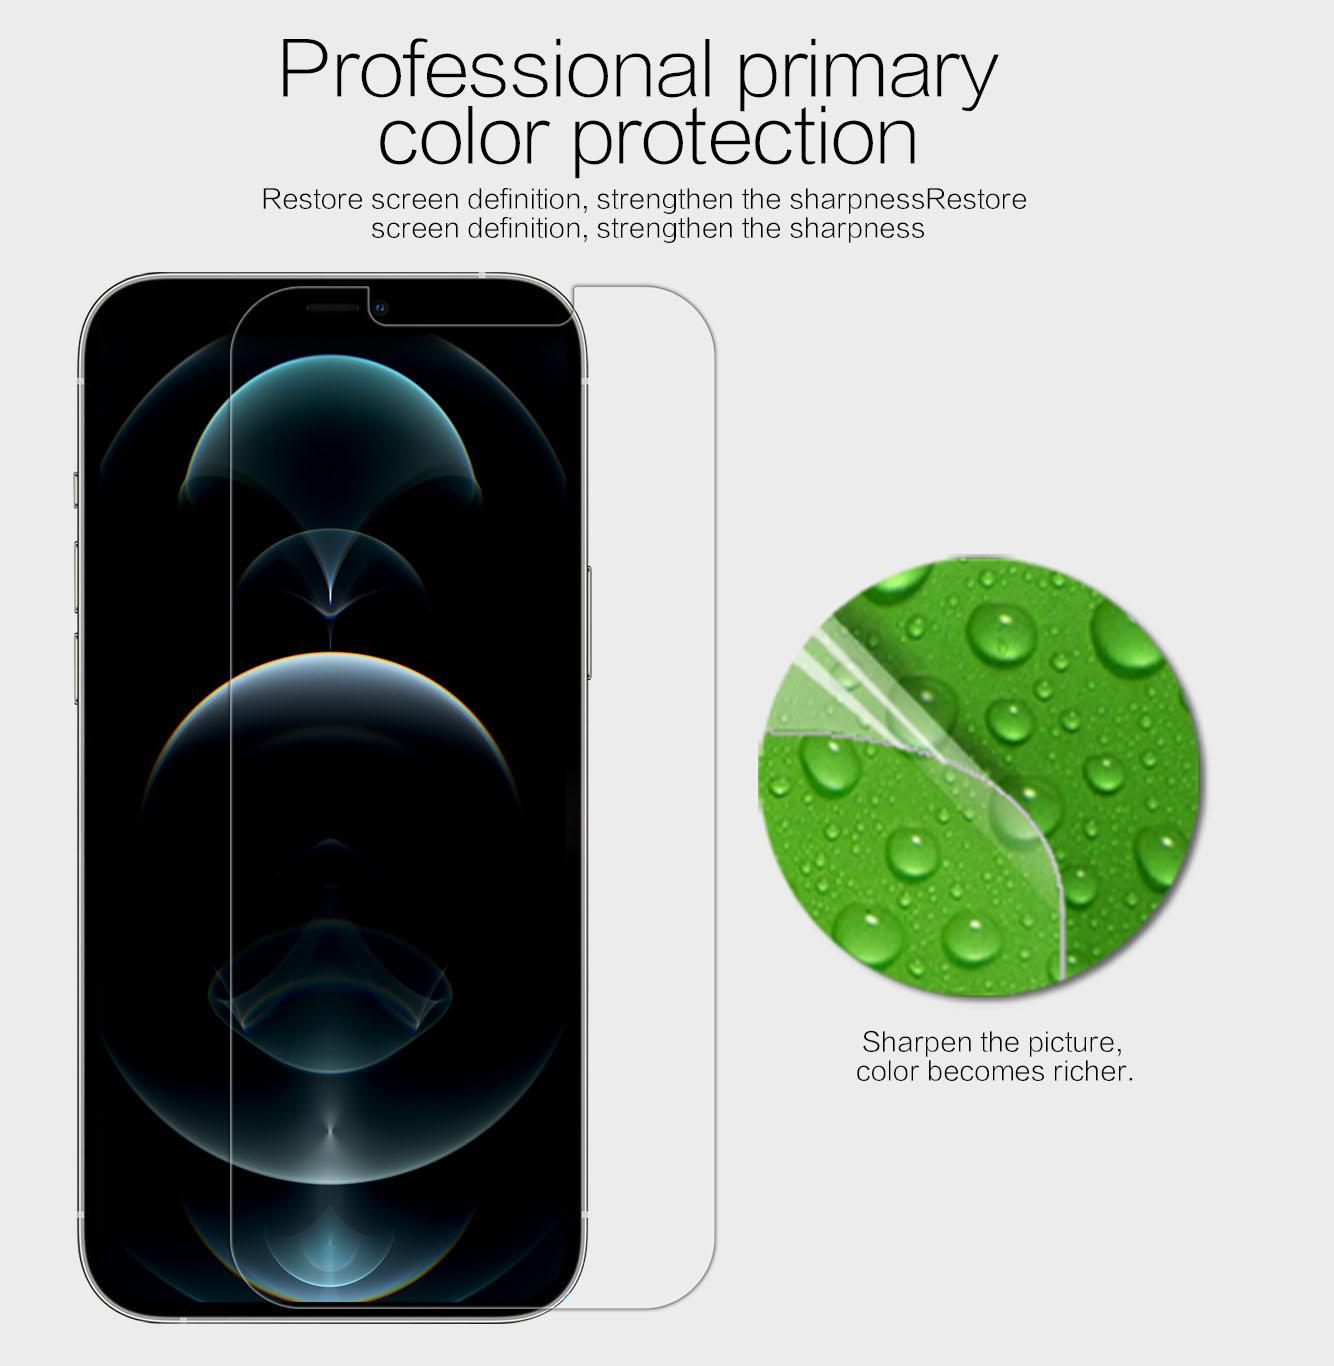 iPhone 12/12 Pro screen protector